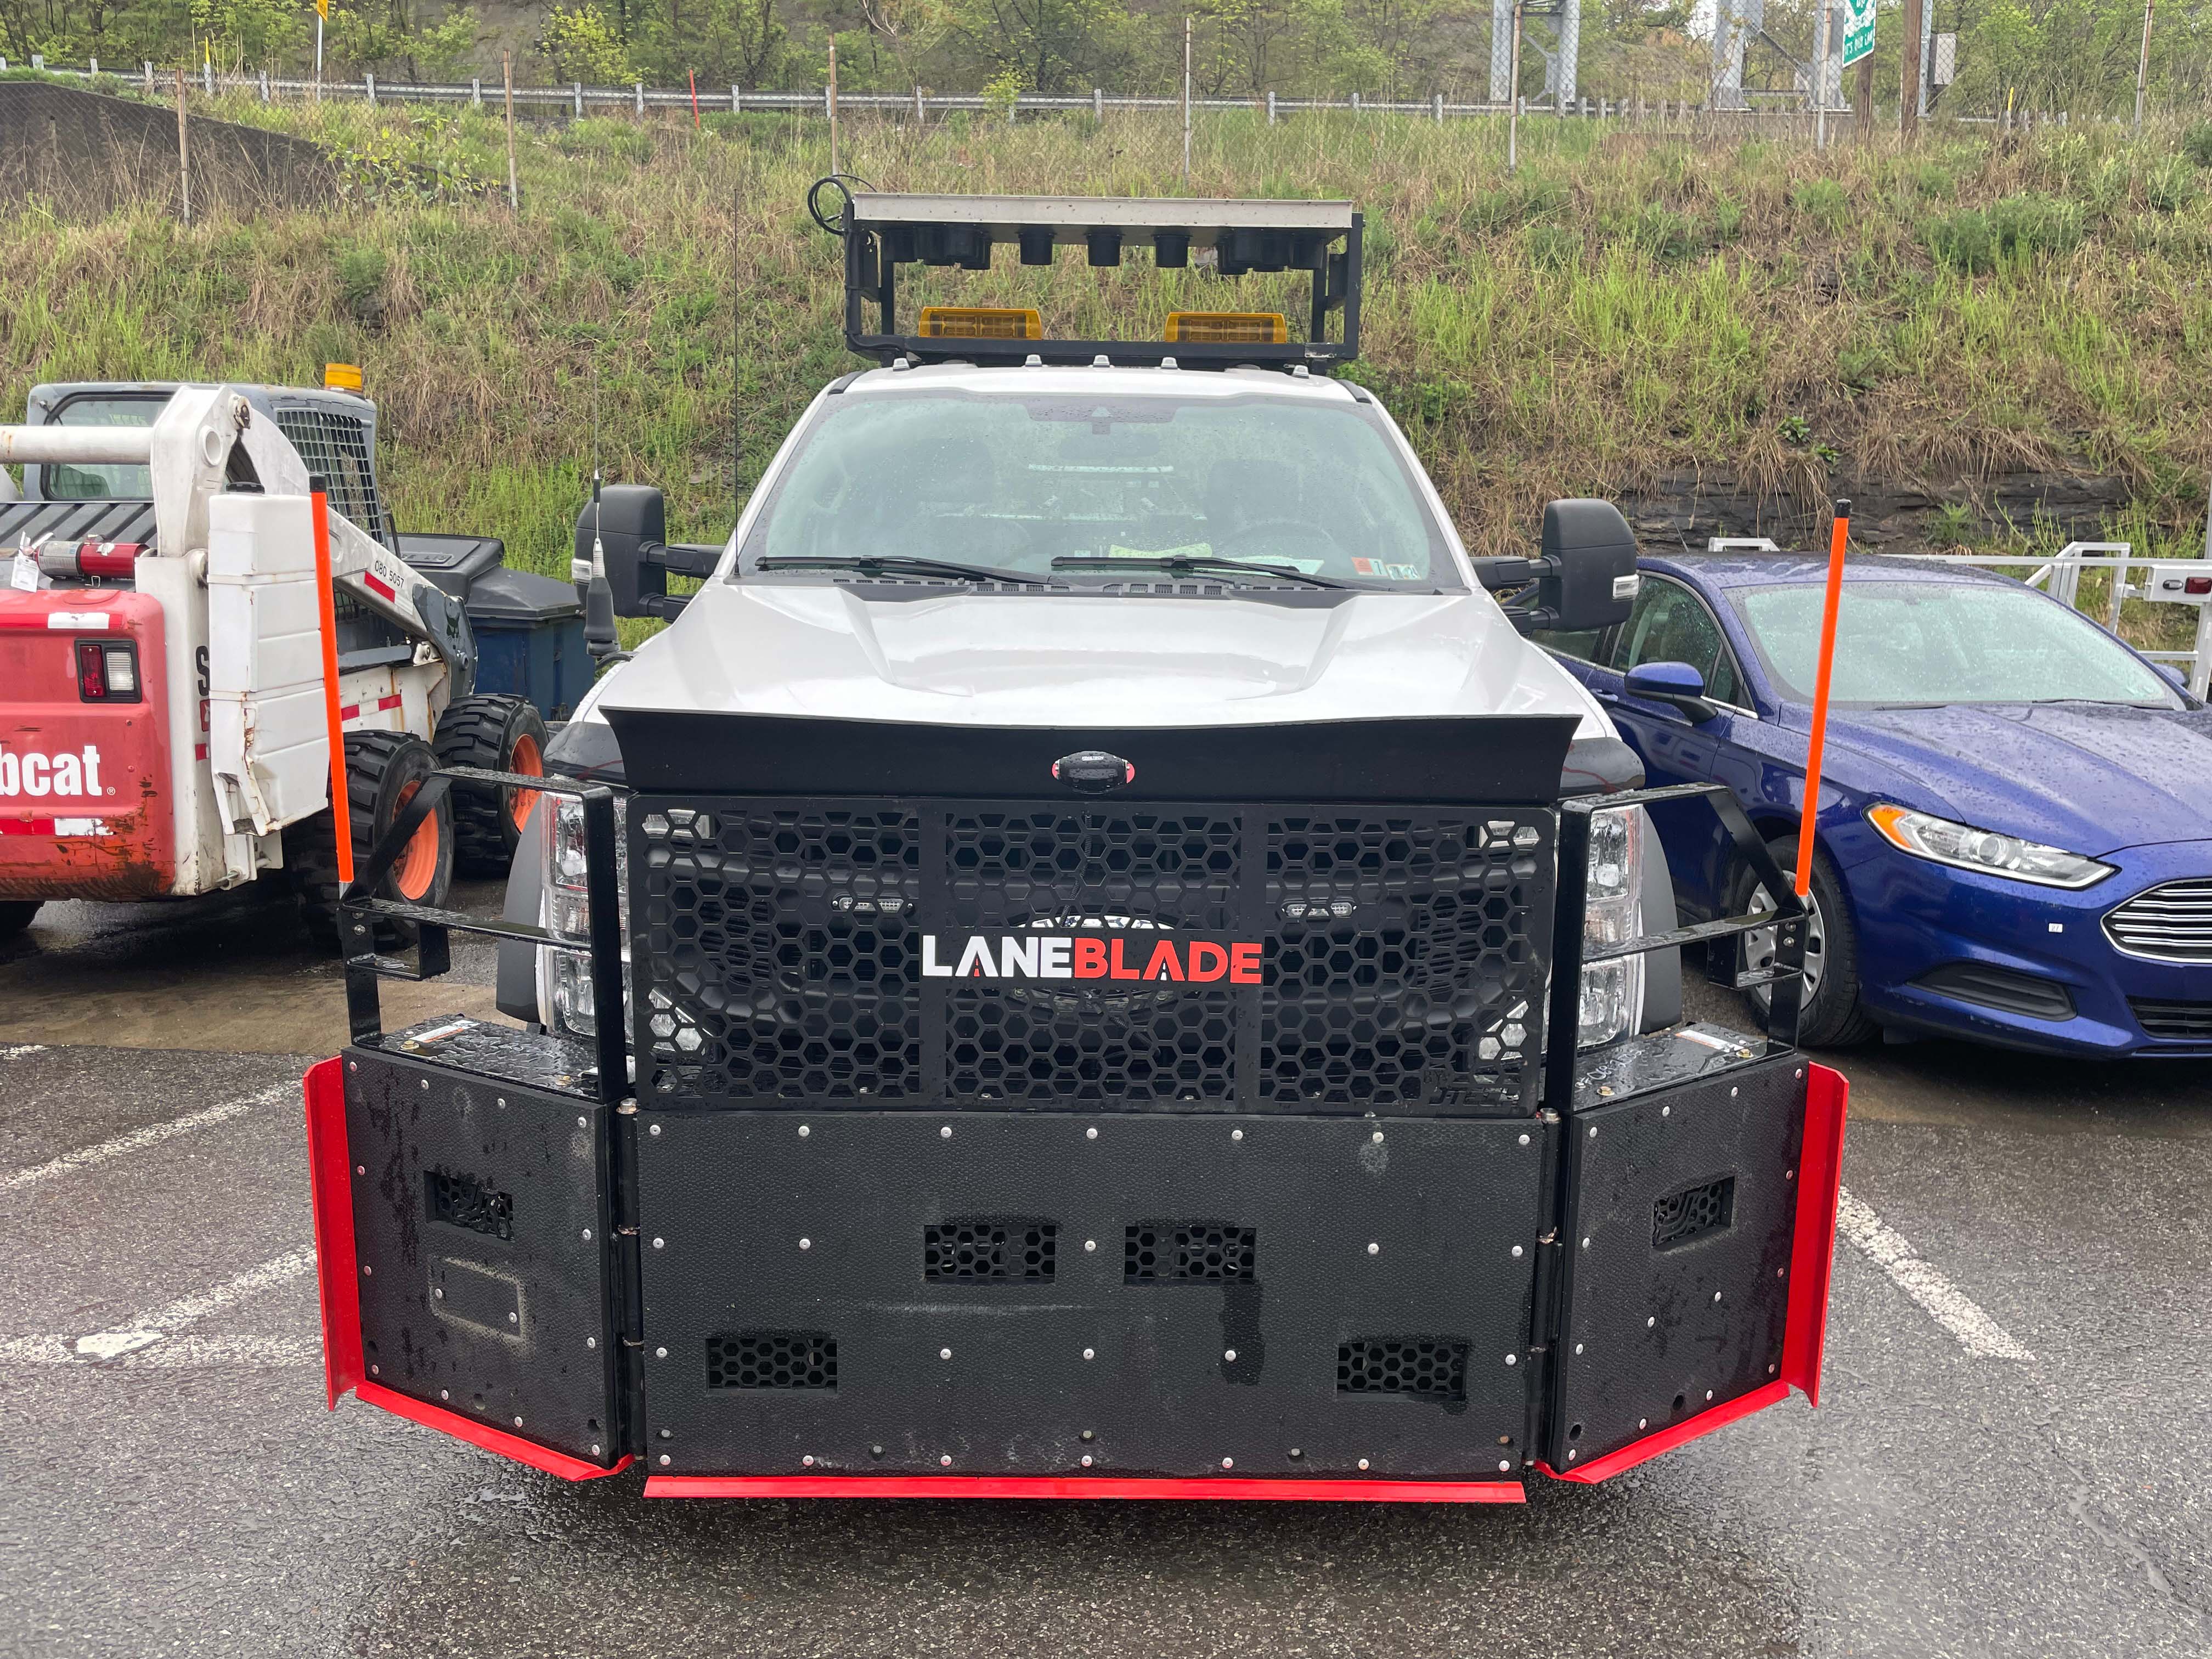 An image of the front of a PennDOT truck with a large black metal LaneBlade with red trim mounted to the front.